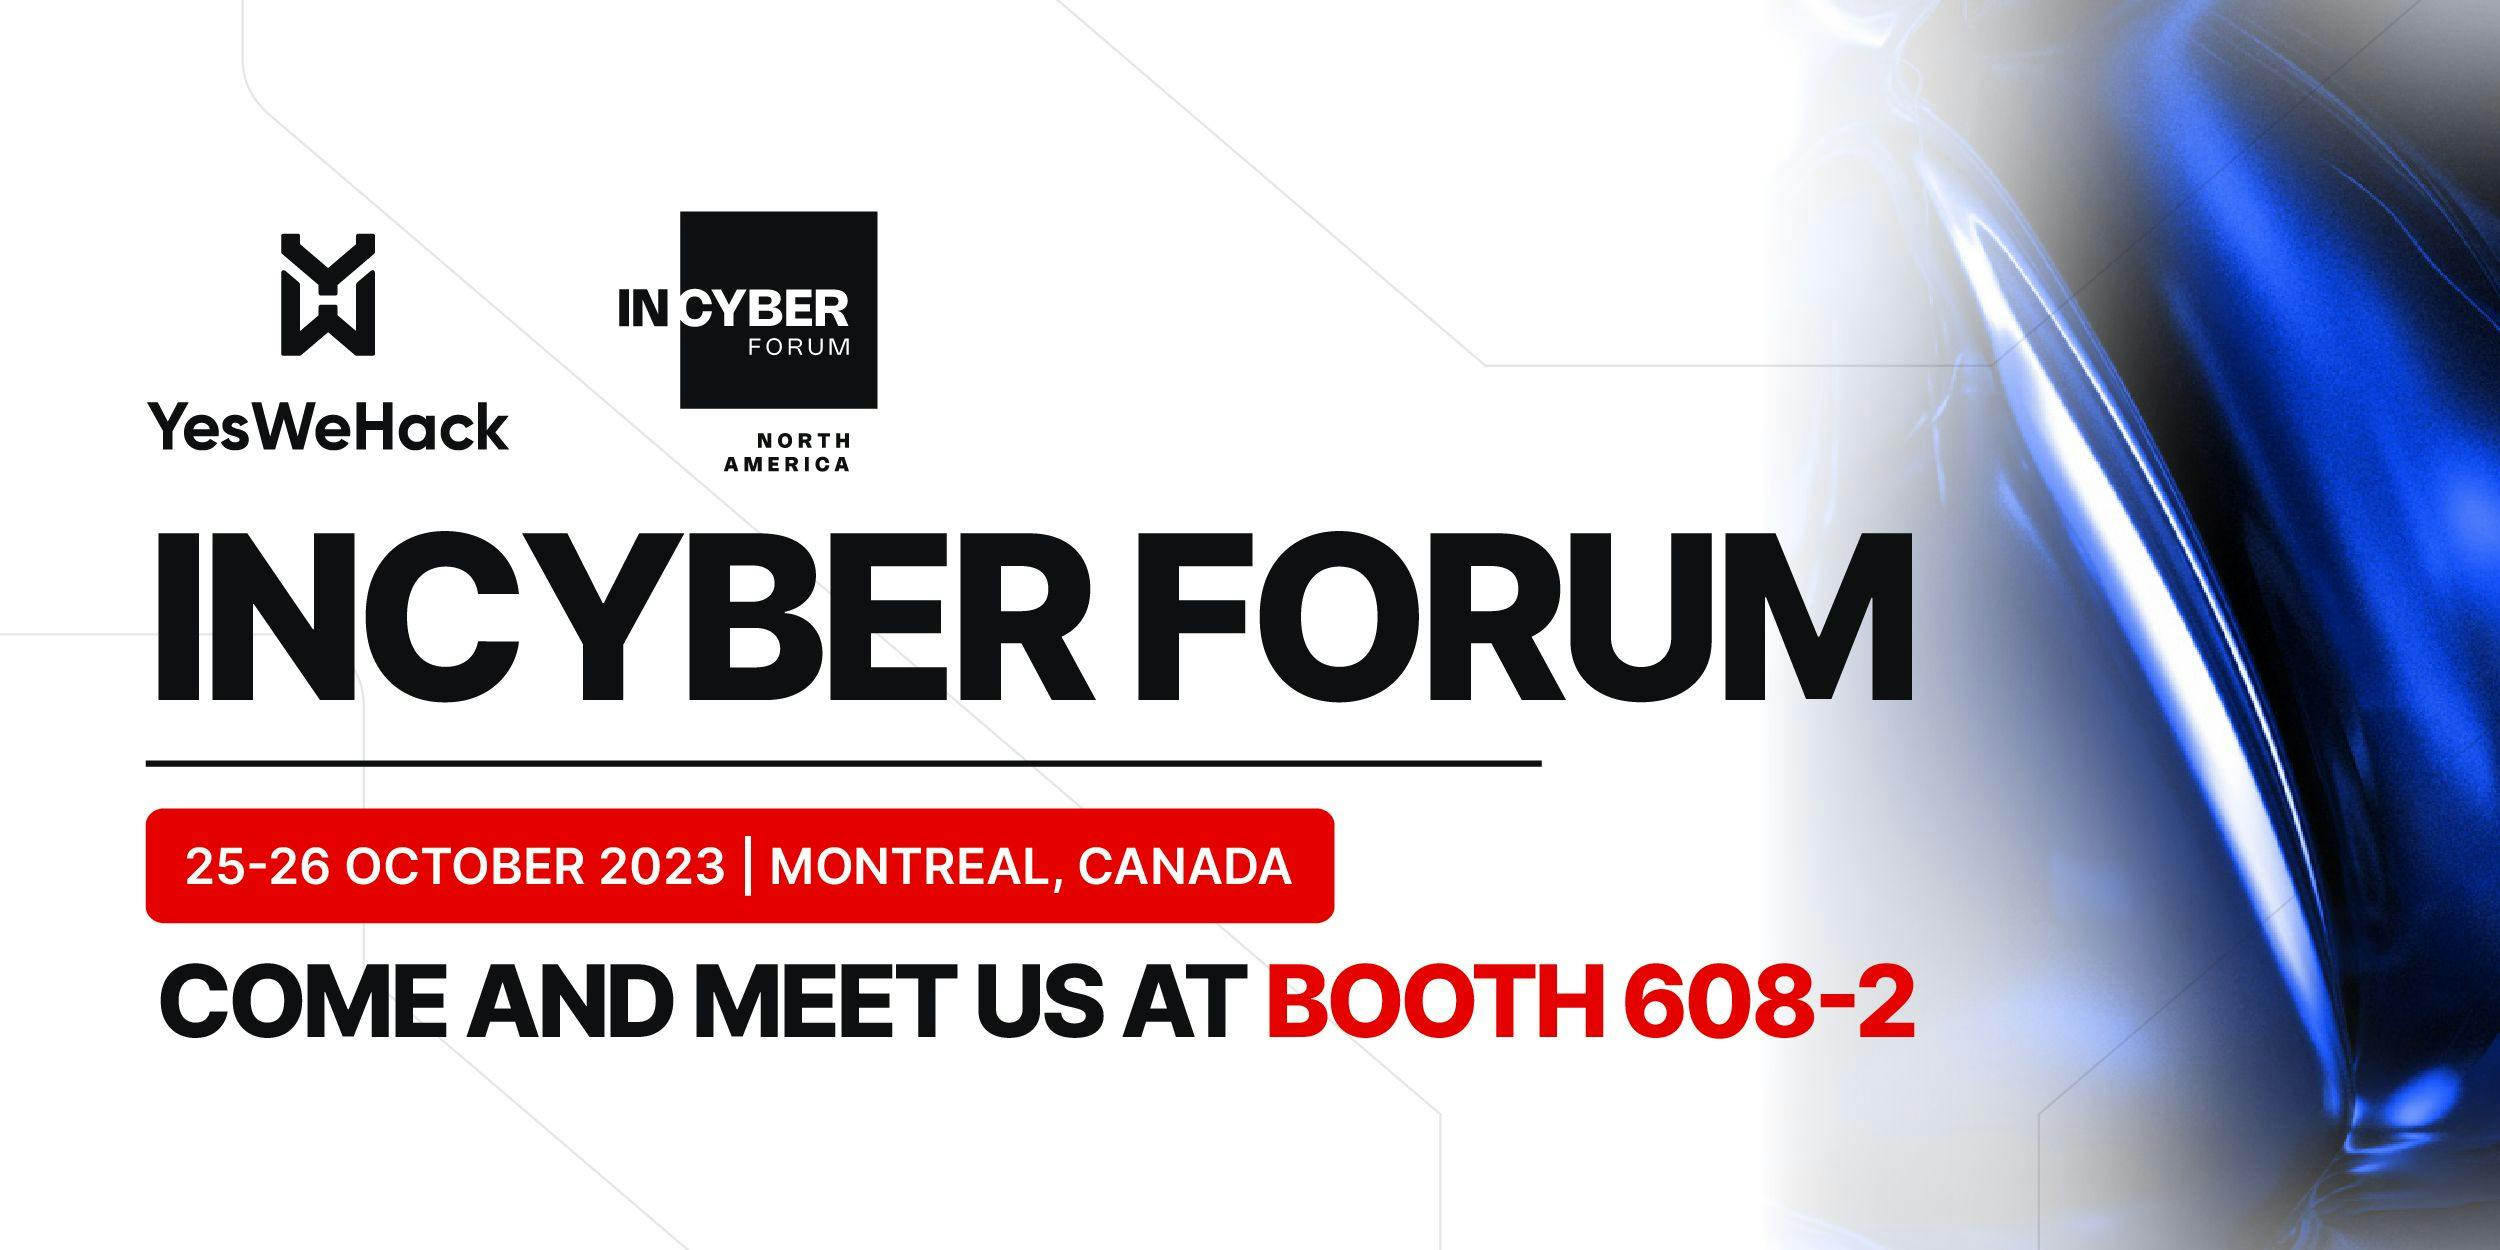 YesWeHack at InCyber Forum North America